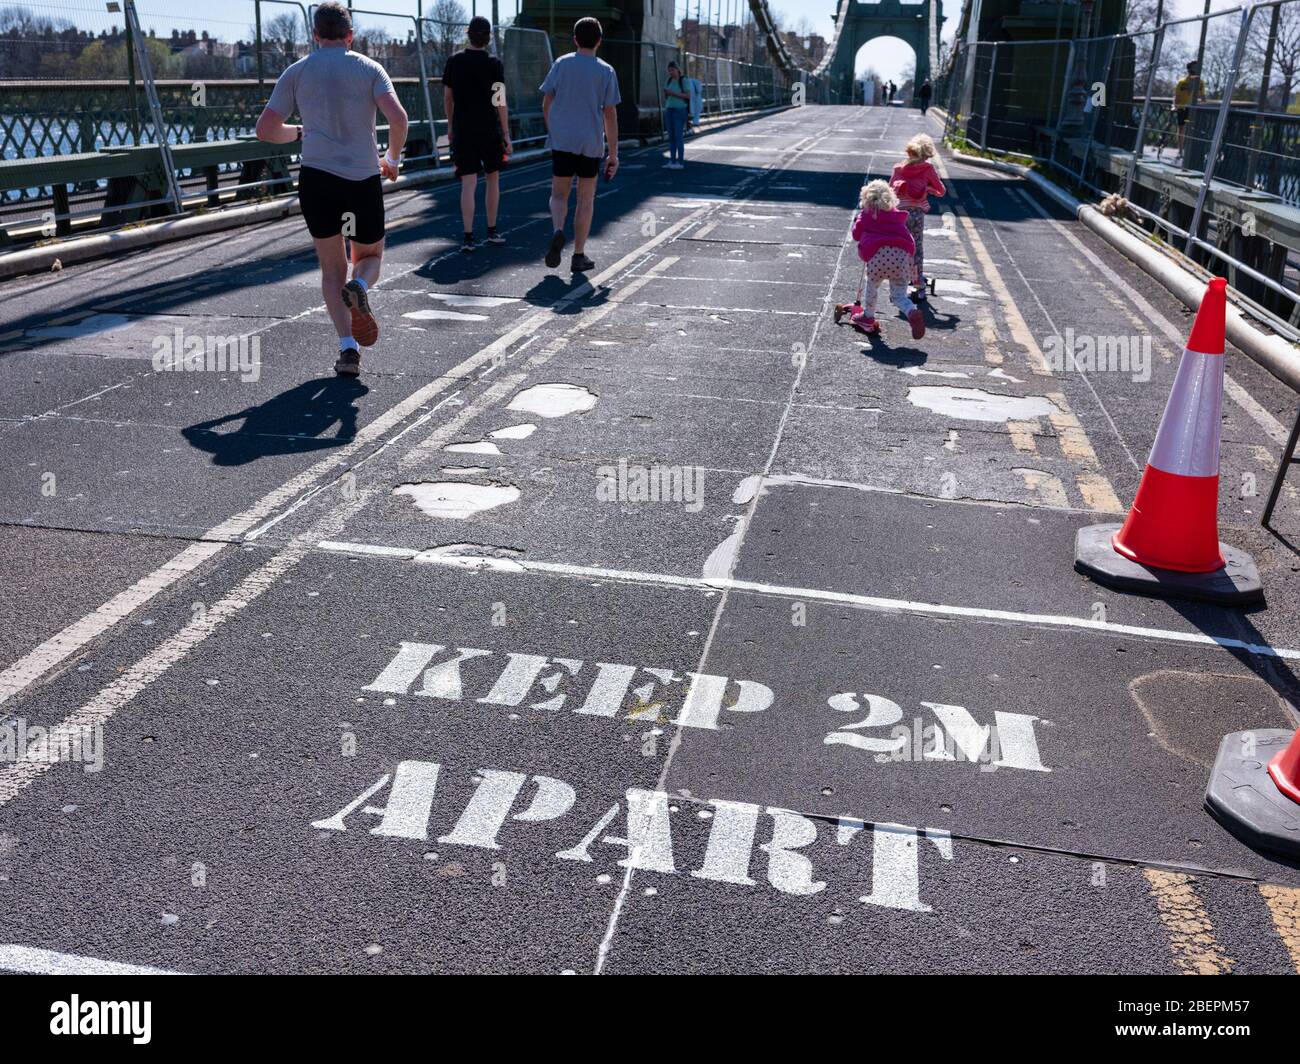 A sign painted on the road surface warns pedestrians to keep their distance in order to prevent the Covid 19 virus spreading. Hammersmith Bridge, Lond Stock Photo